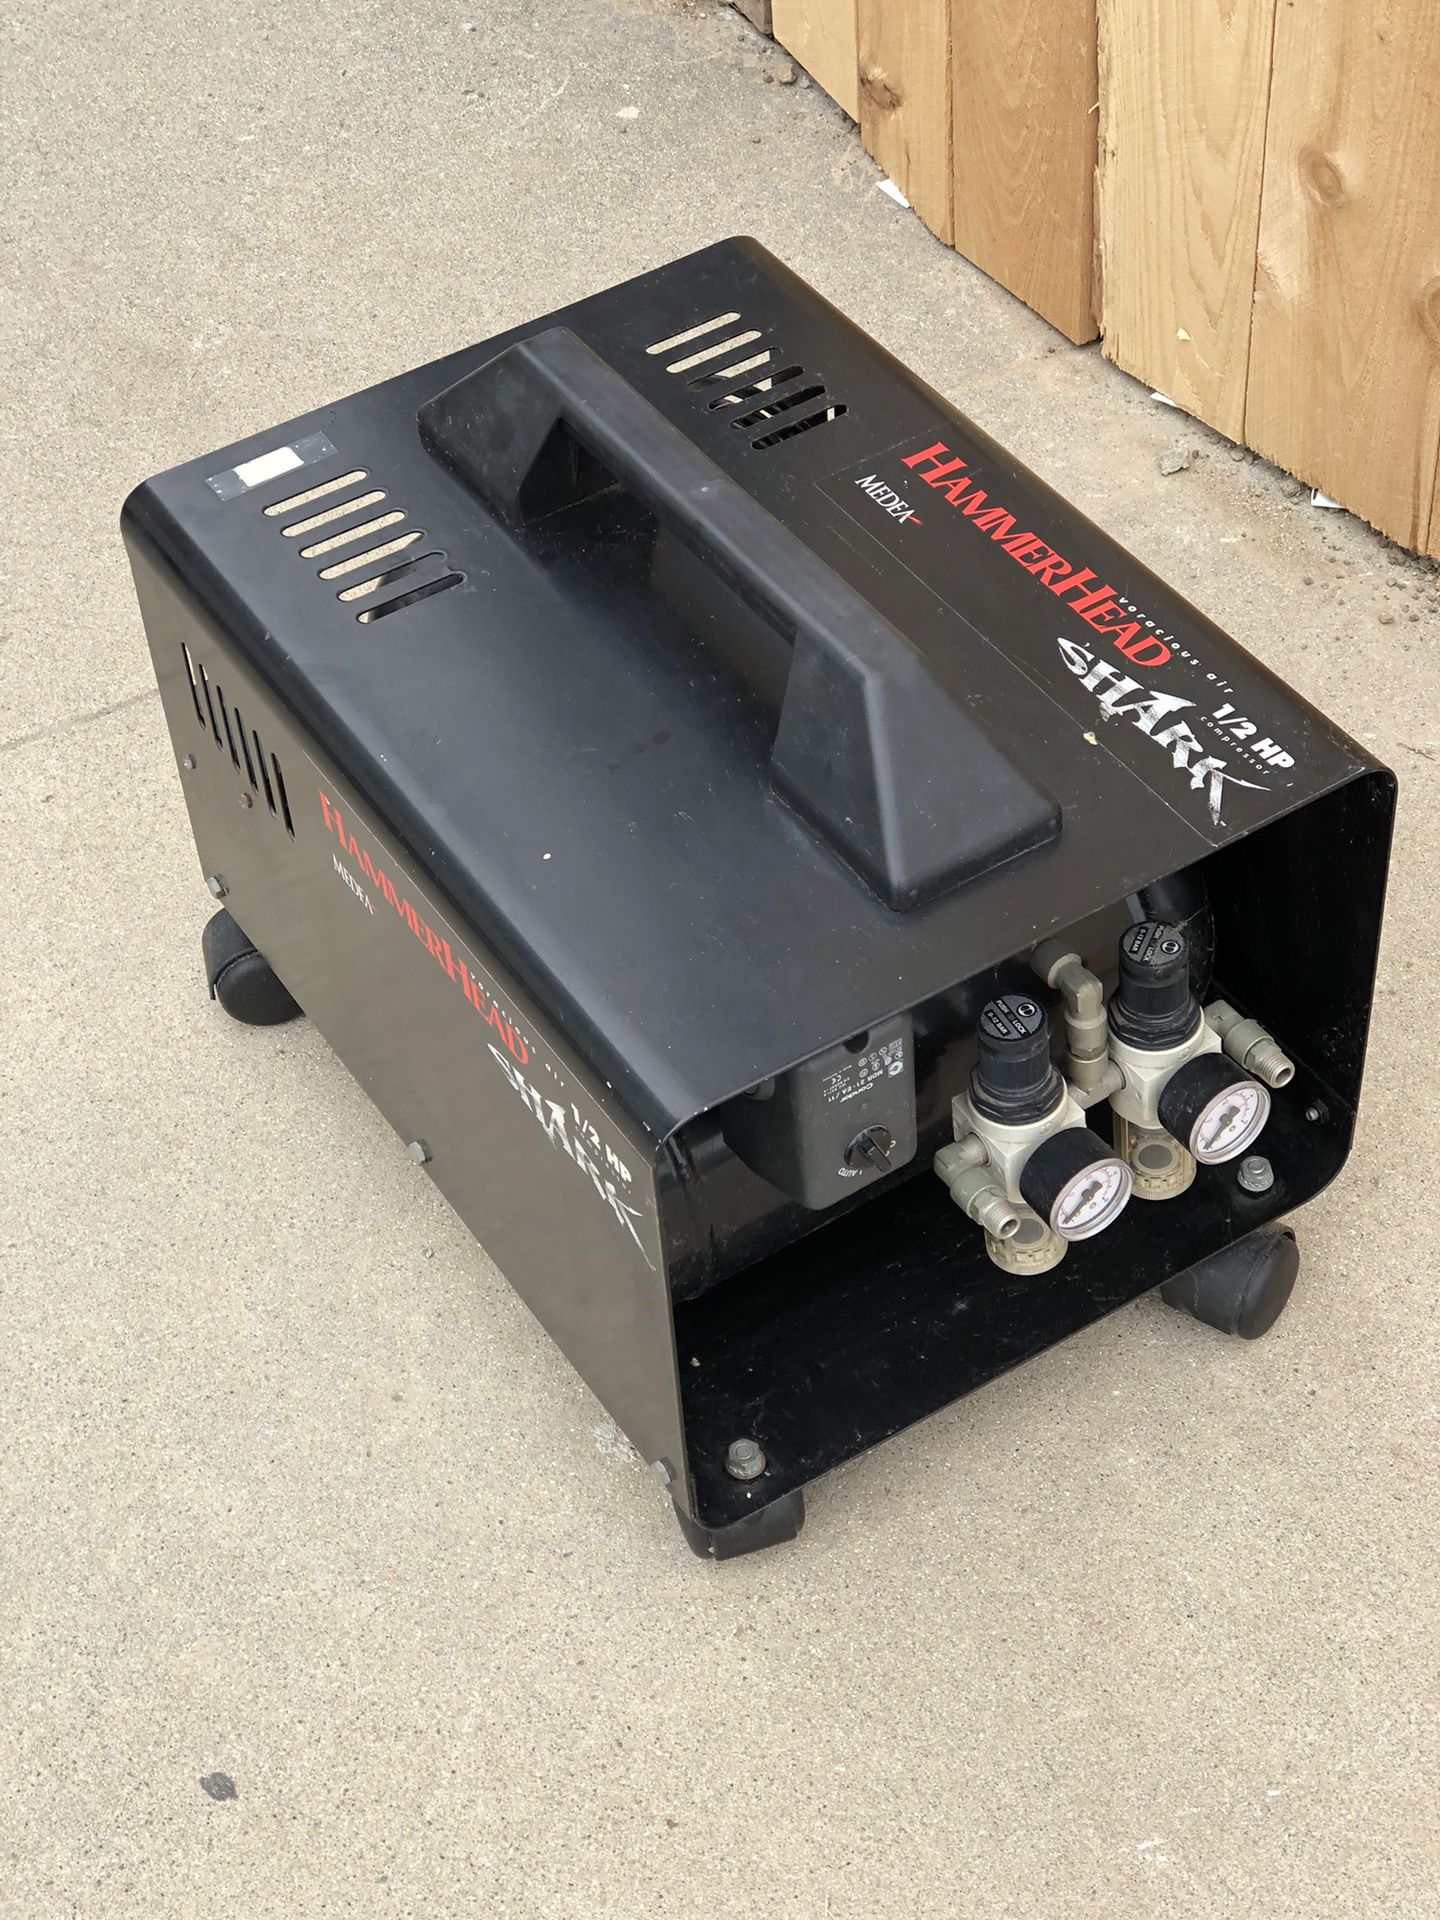 Cool Tooty Airbrush Compressor With Tank By No-Name brand for Sale in  Pembroke Pines, FL - OfferUp